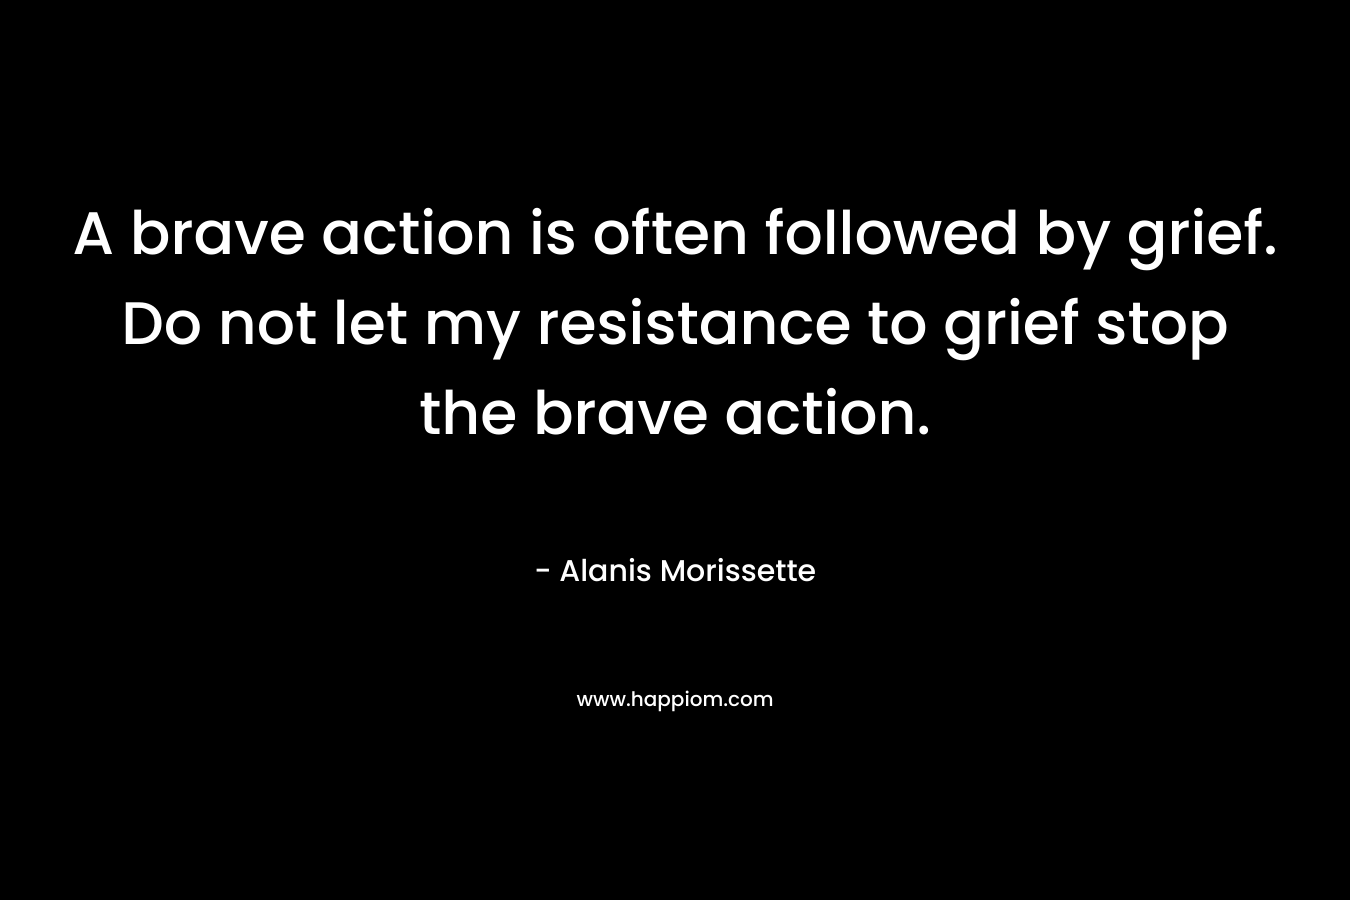 A brave action is often followed by grief. Do not let my resistance to grief stop the brave action. – Alanis Morissette